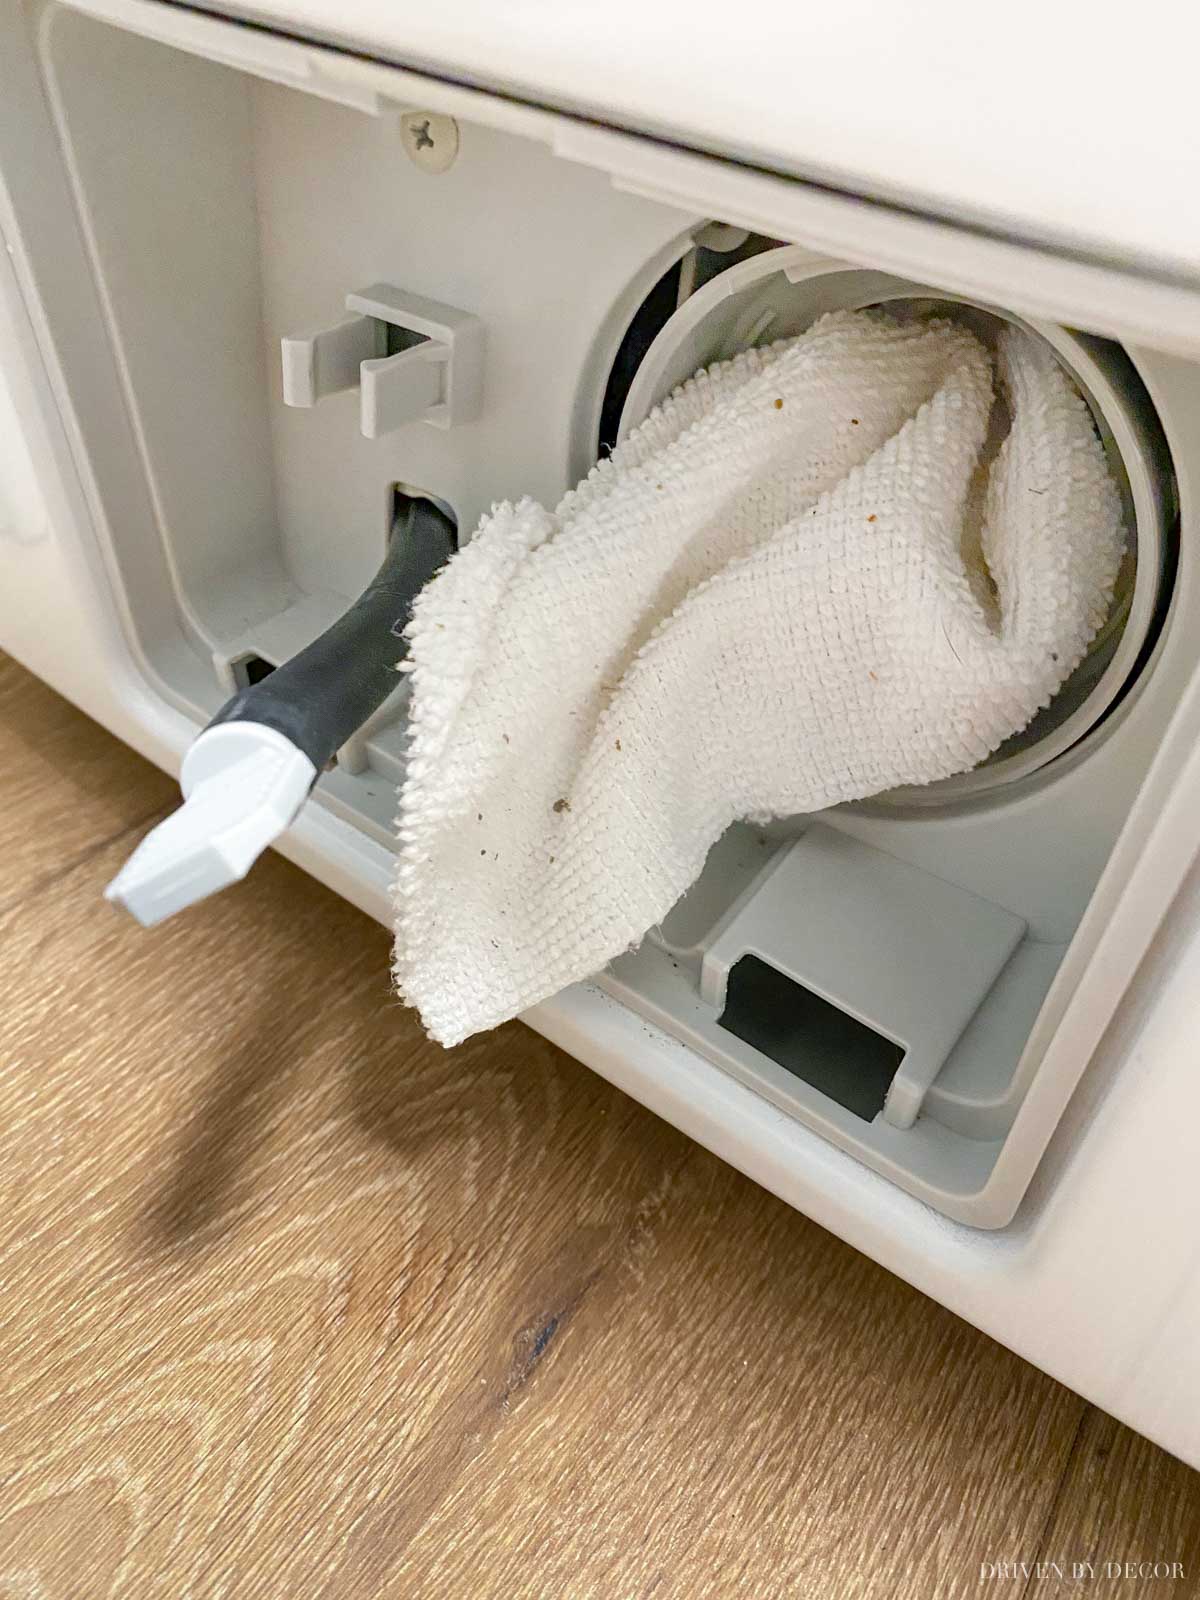 A step by step of how to deep clean your washing machine